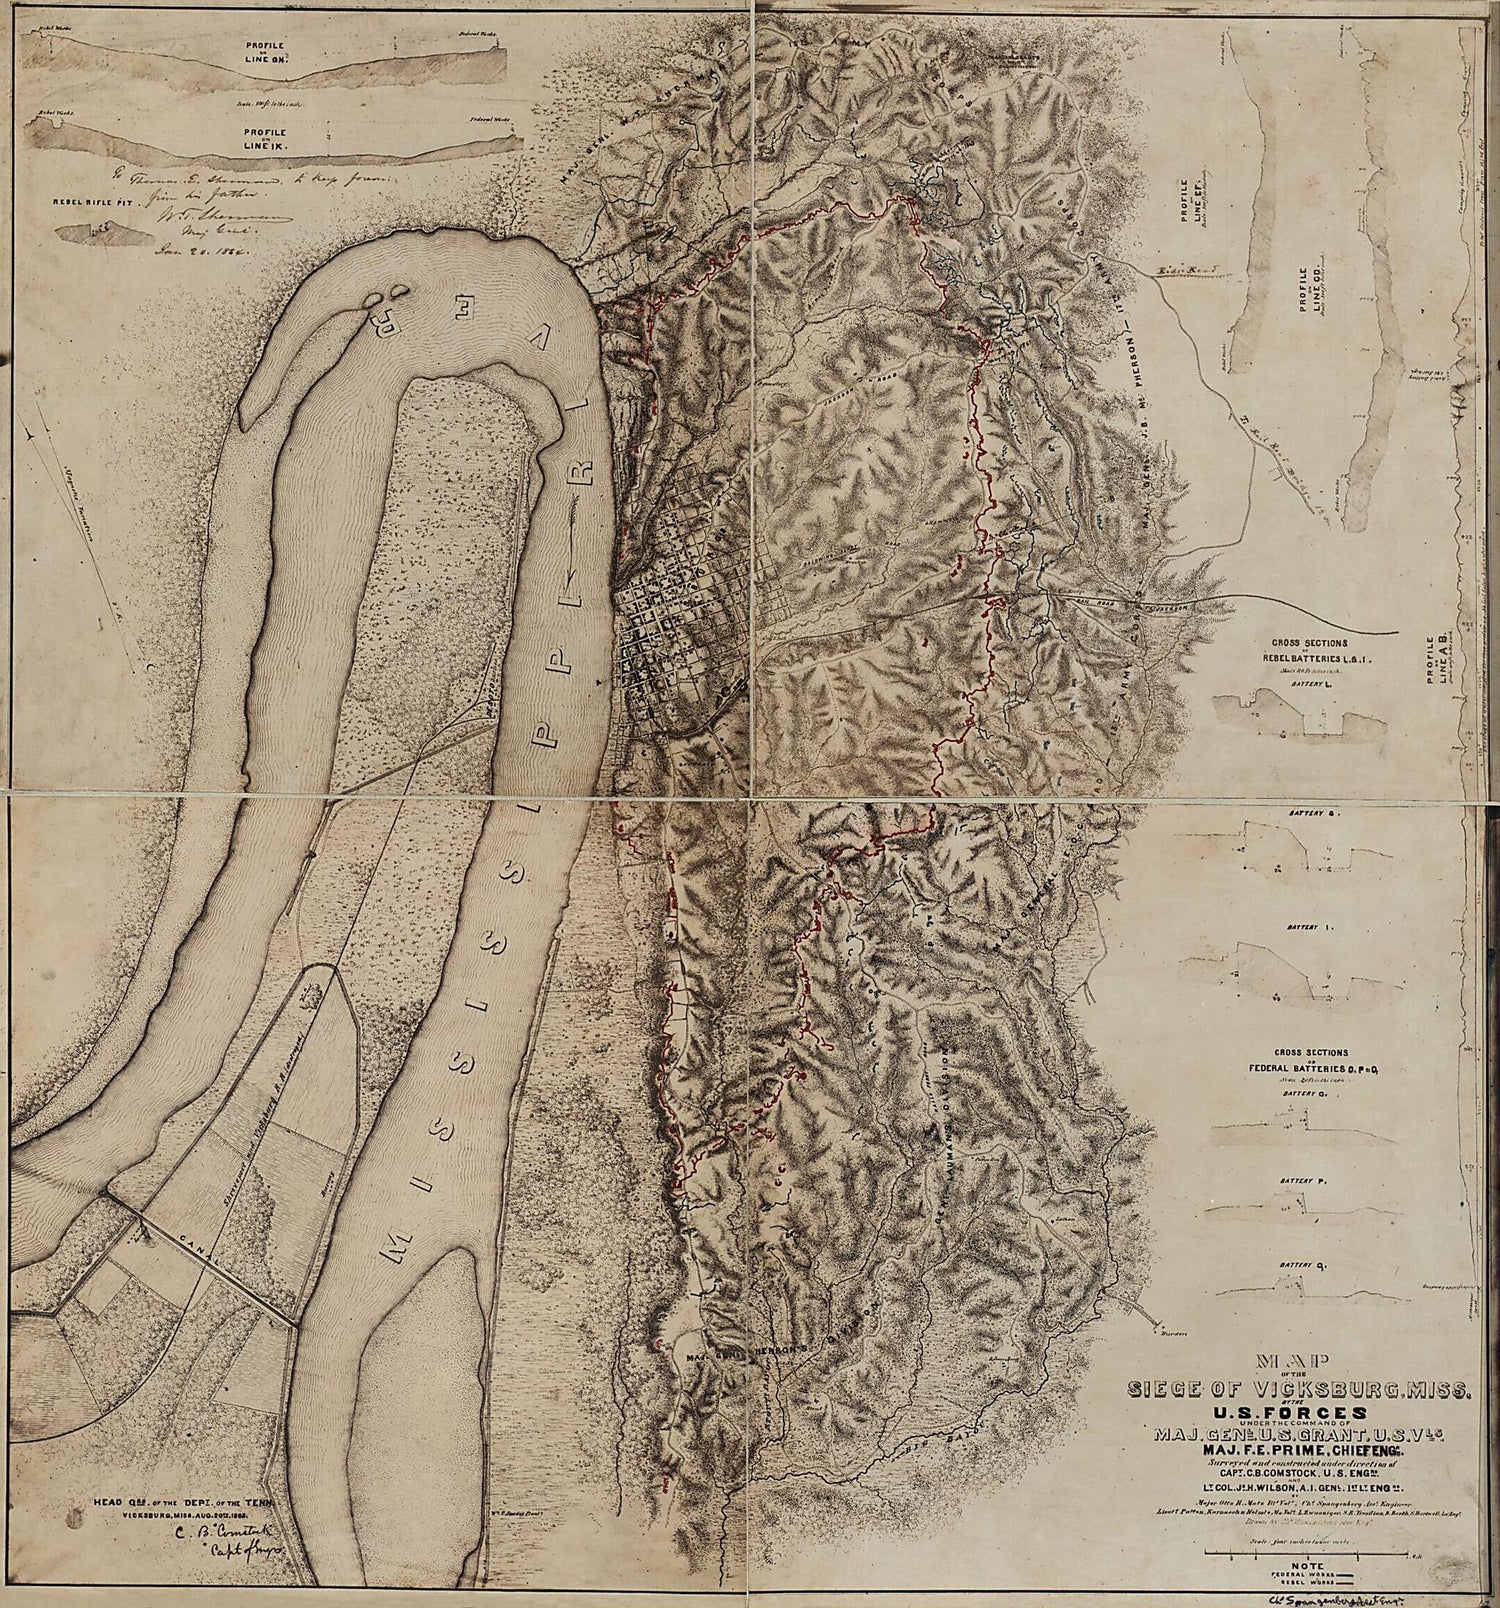 This old map of Map of the Siege of Vicksburg, Mississippi from 1863 was created by Charles Spangenberg in 1863